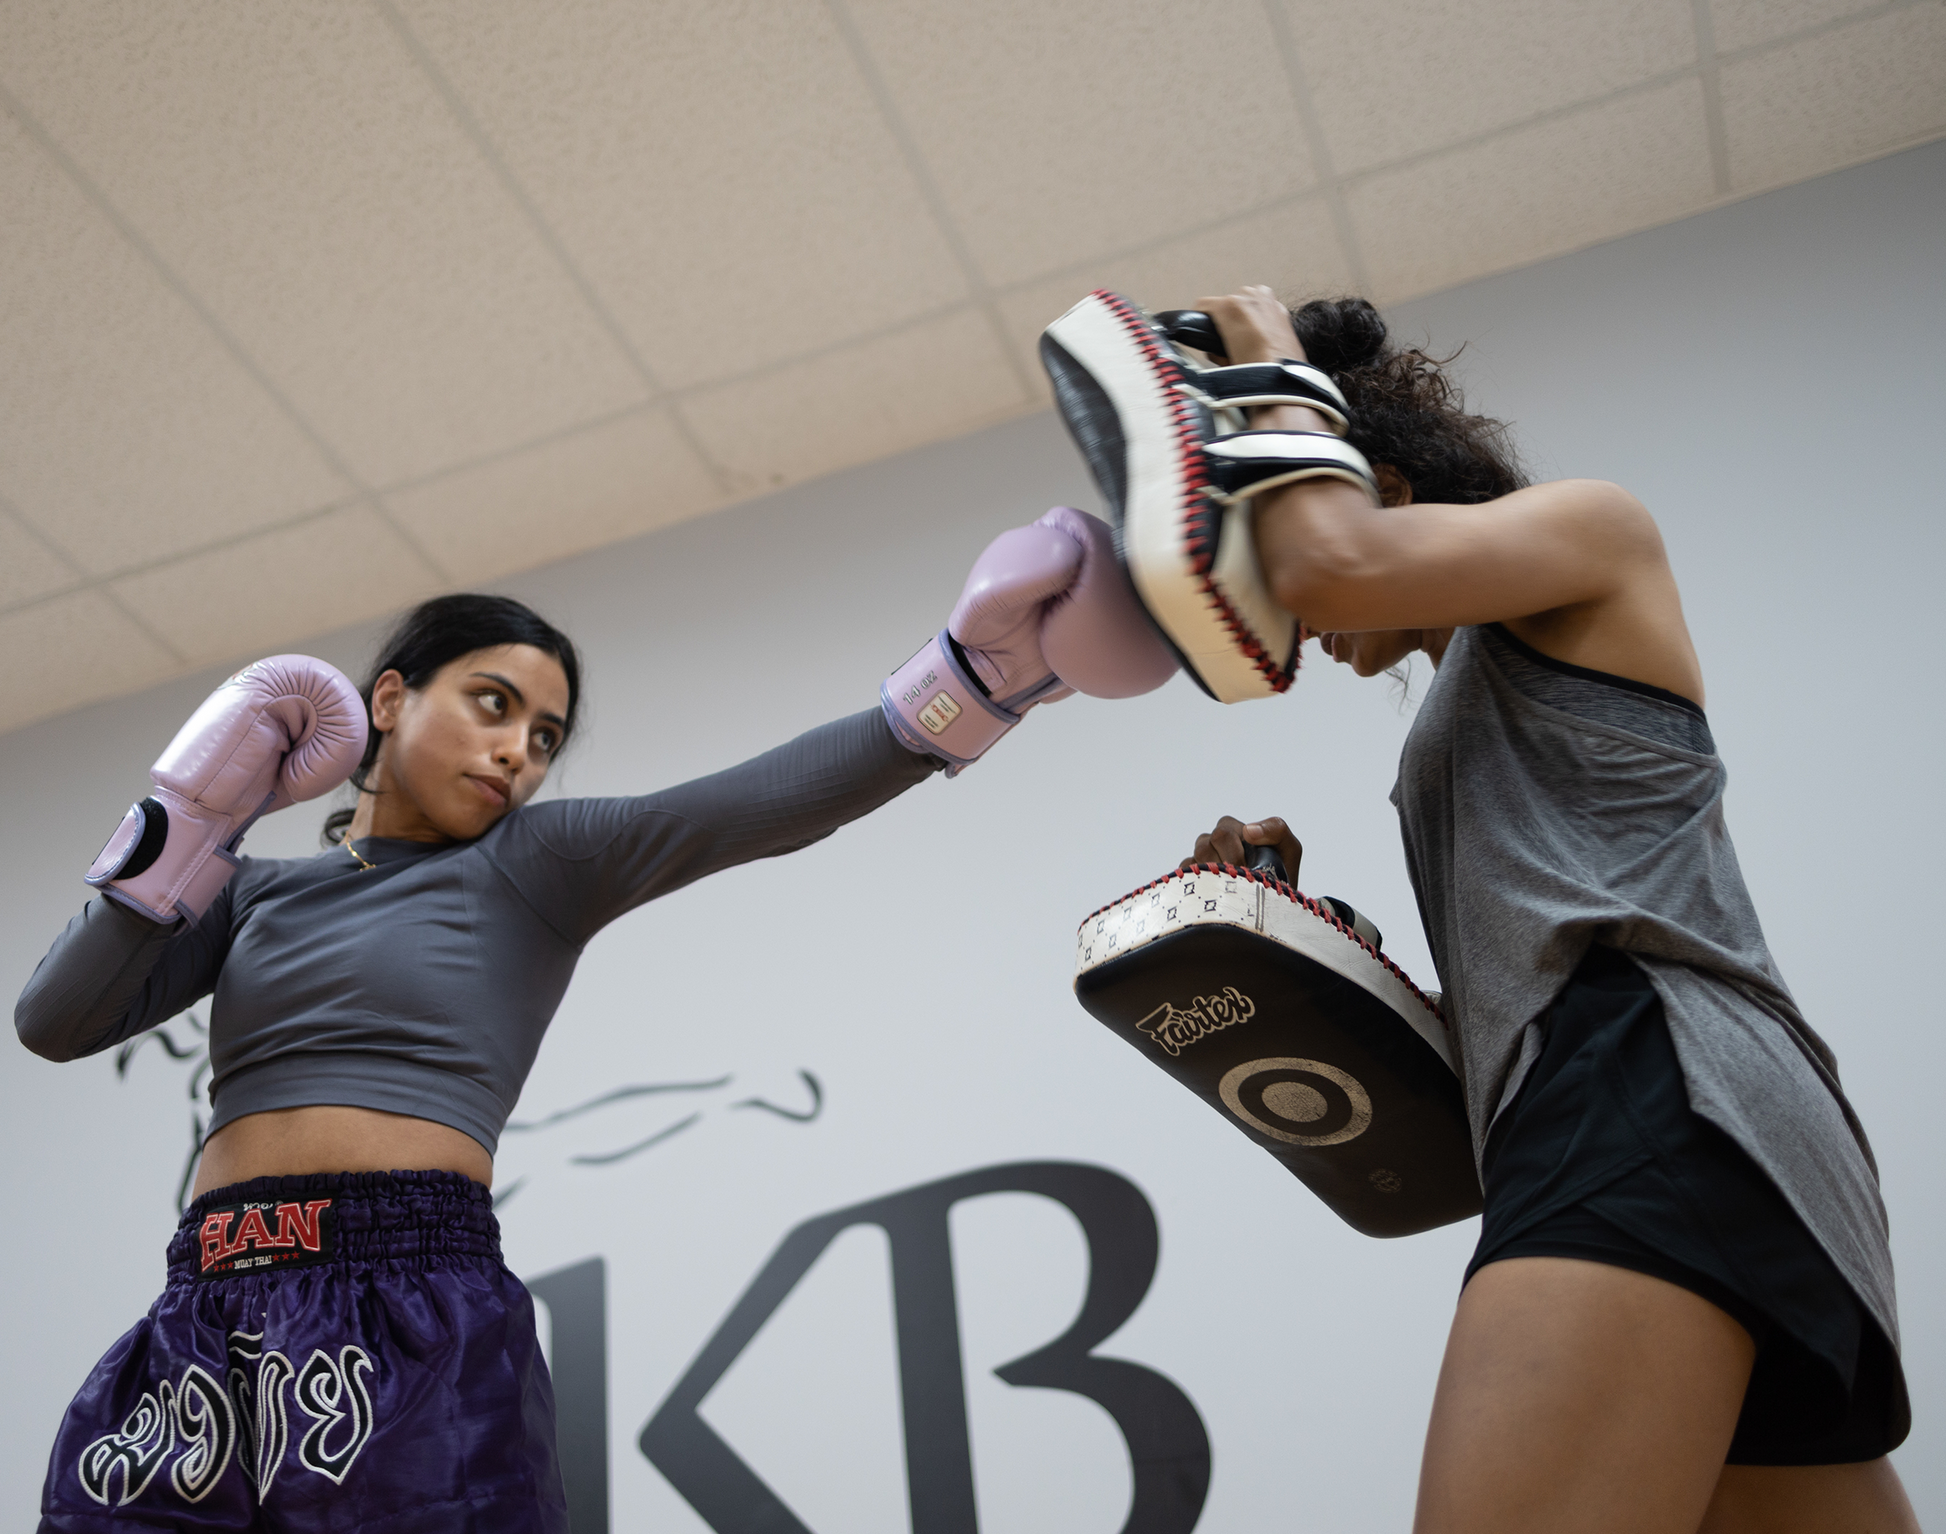 Image of two women practicing during a lesson at Ultimate Martial Arts & Fitness Muay Thai and kickboxing gym in Mississauga, Ontario, Canada